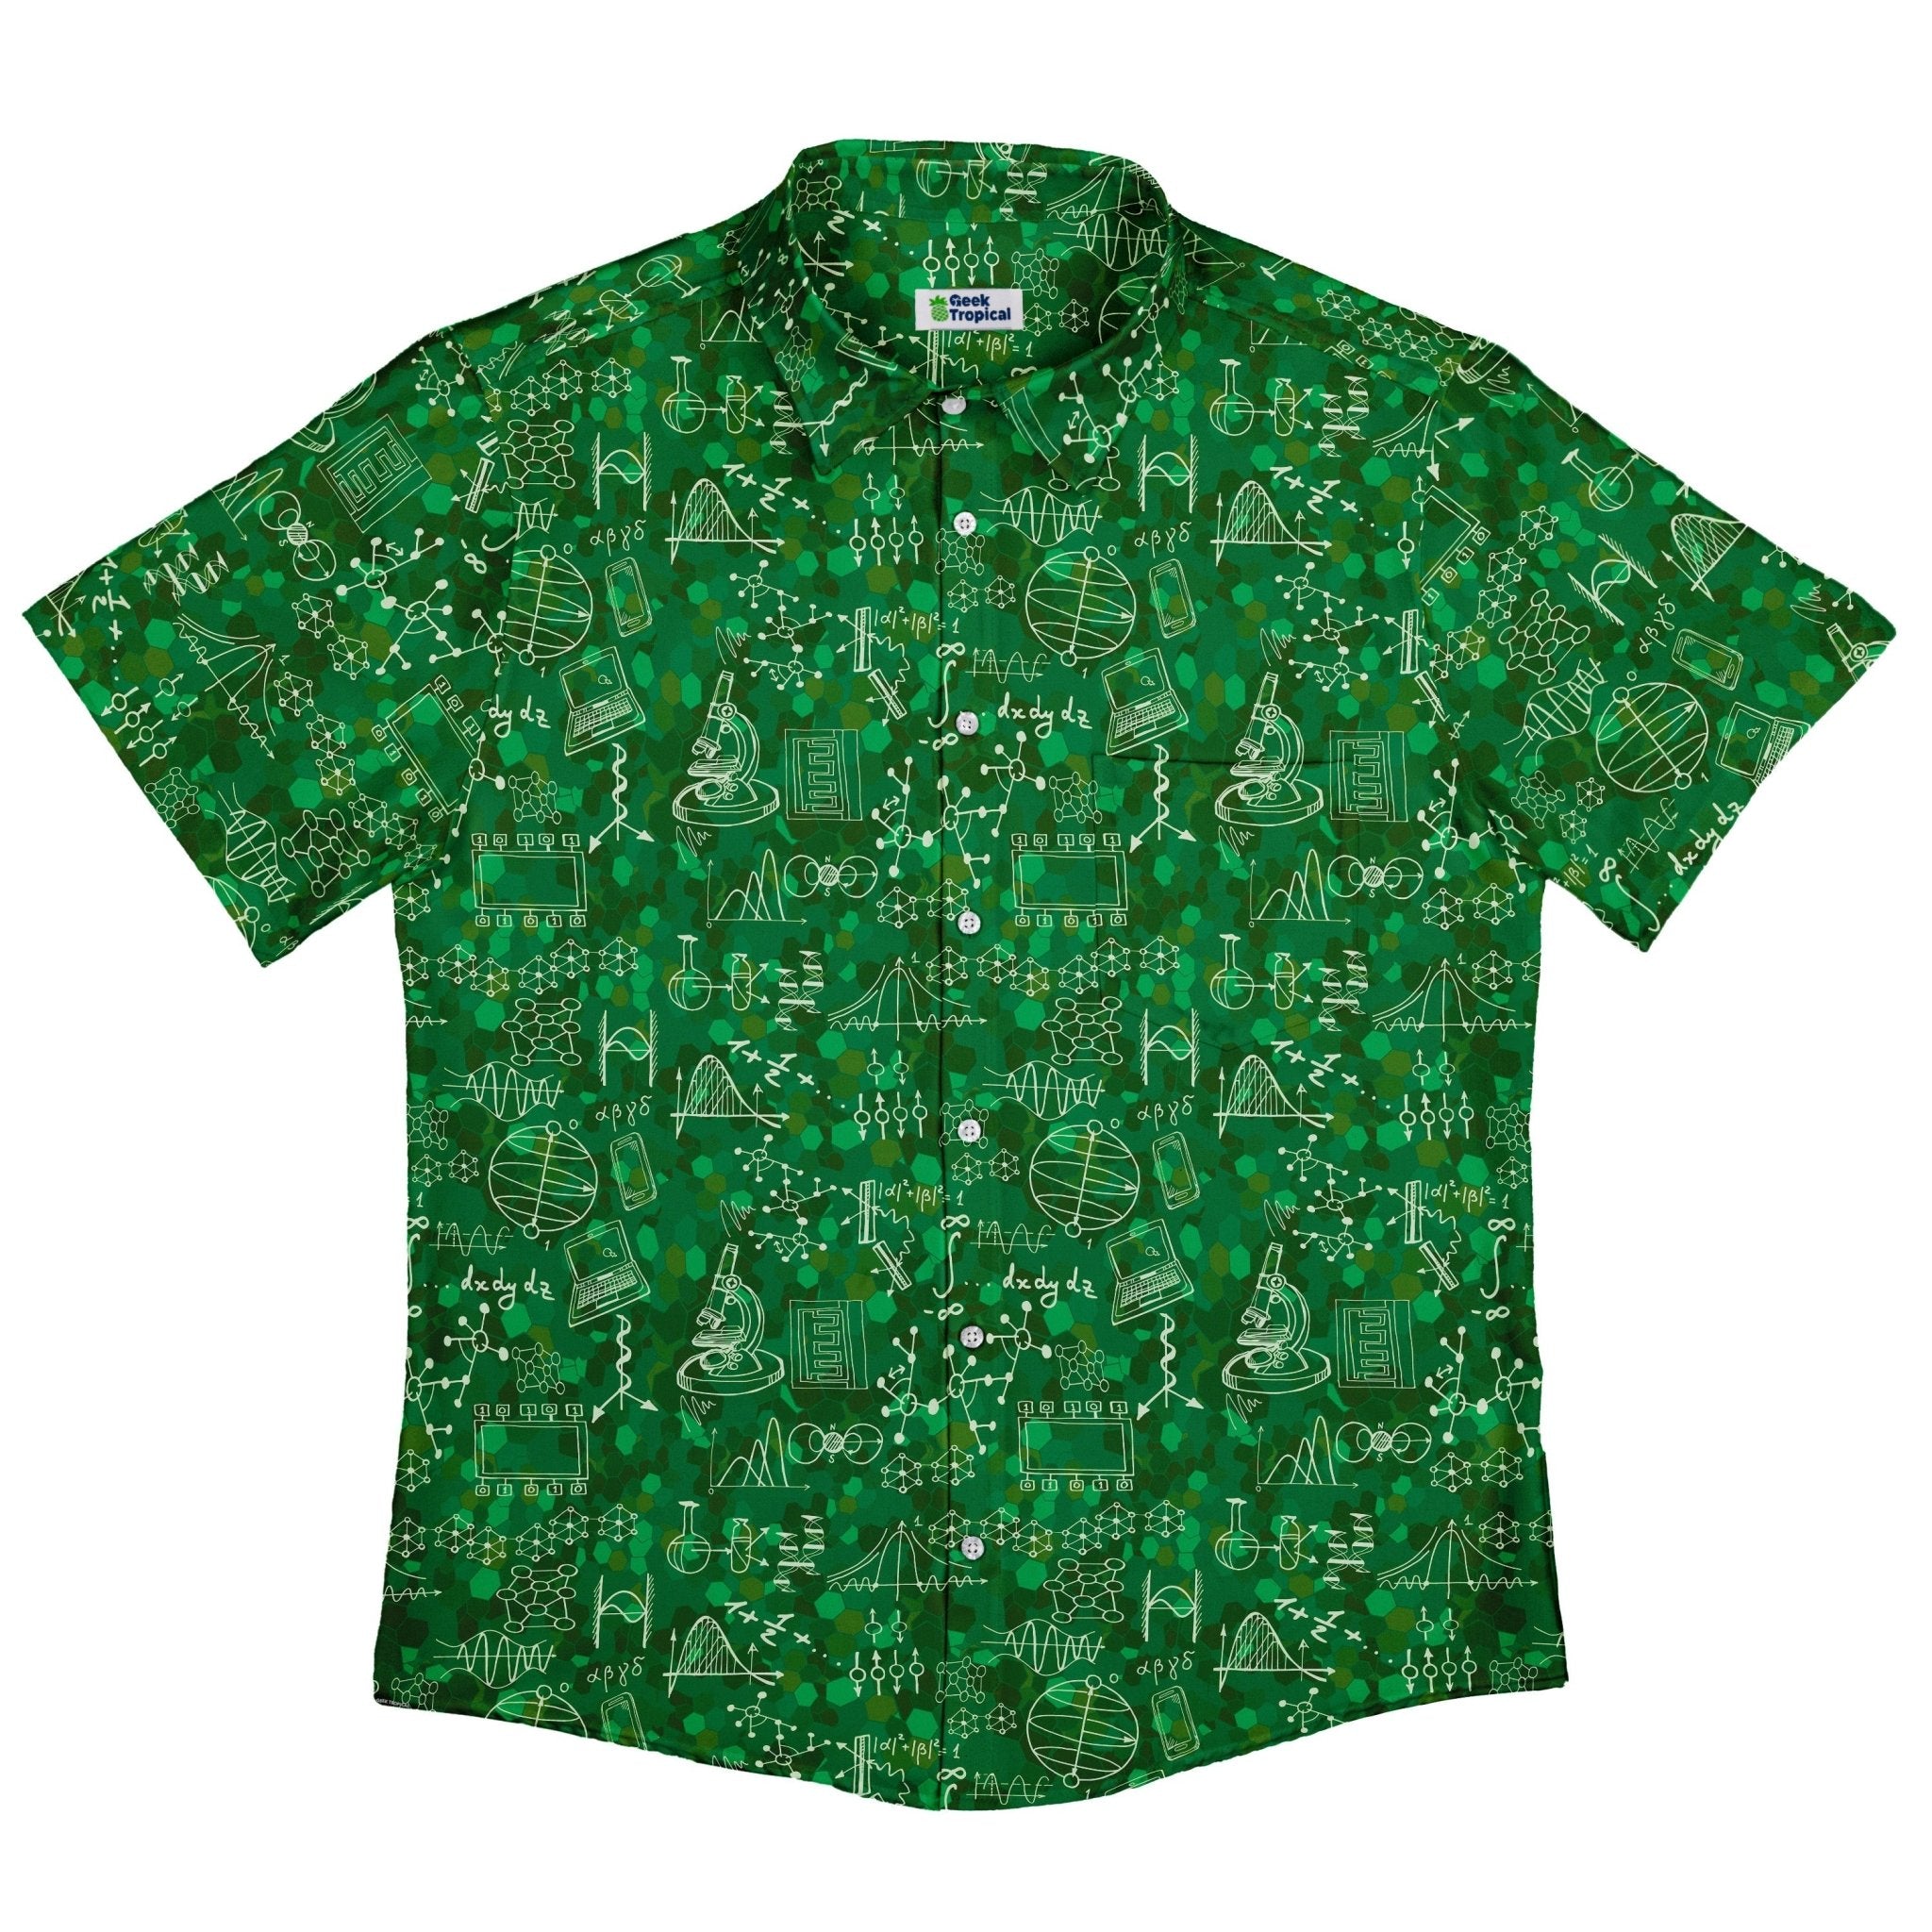 Mad Science Lab Green Button Up Shirt - adult sizing - Maximalist Patterns - science print